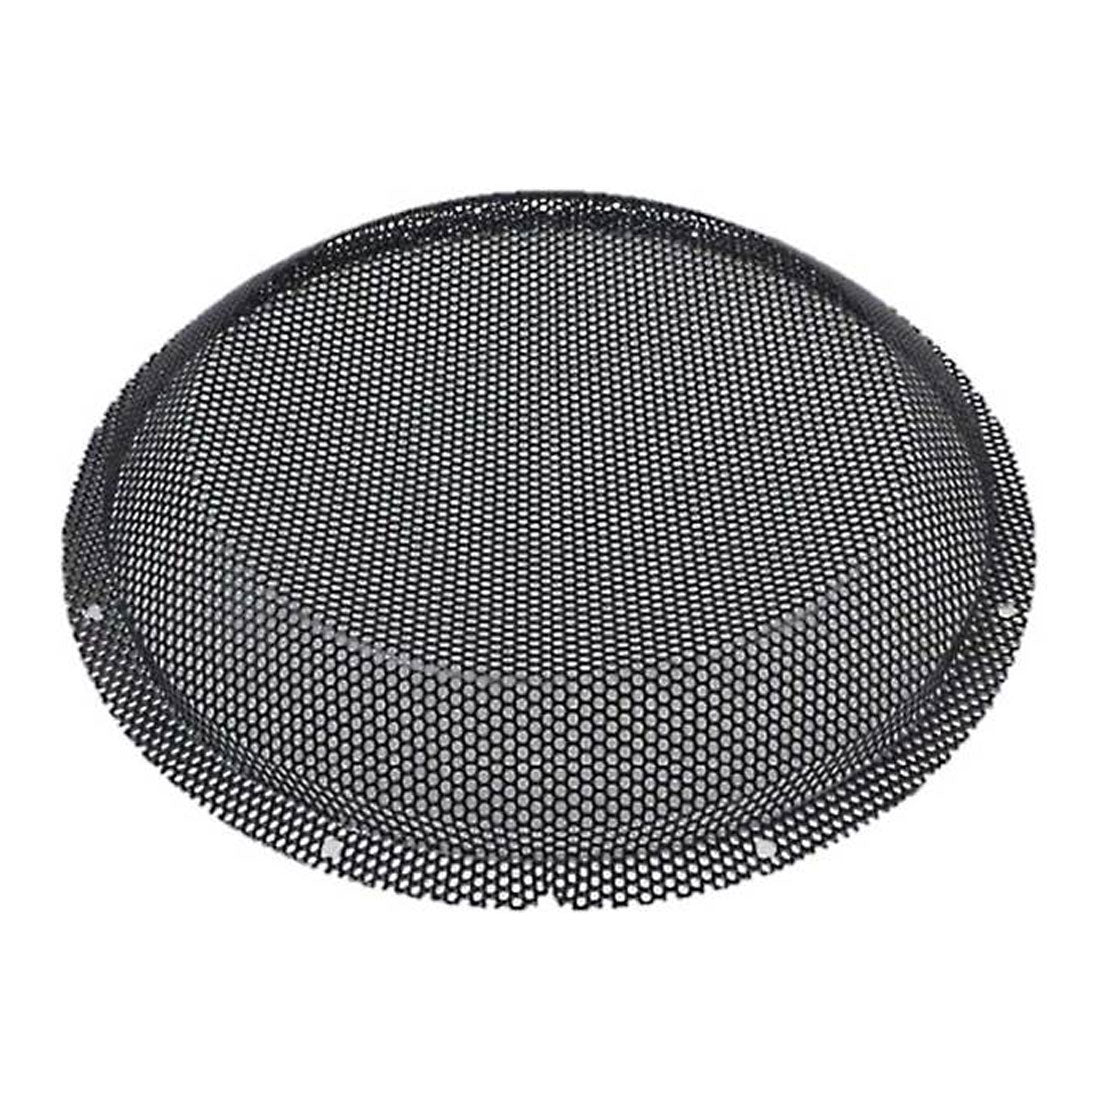 Kenwood CA-121G 12" Grille for Select Kenwood Subwoofers - Each